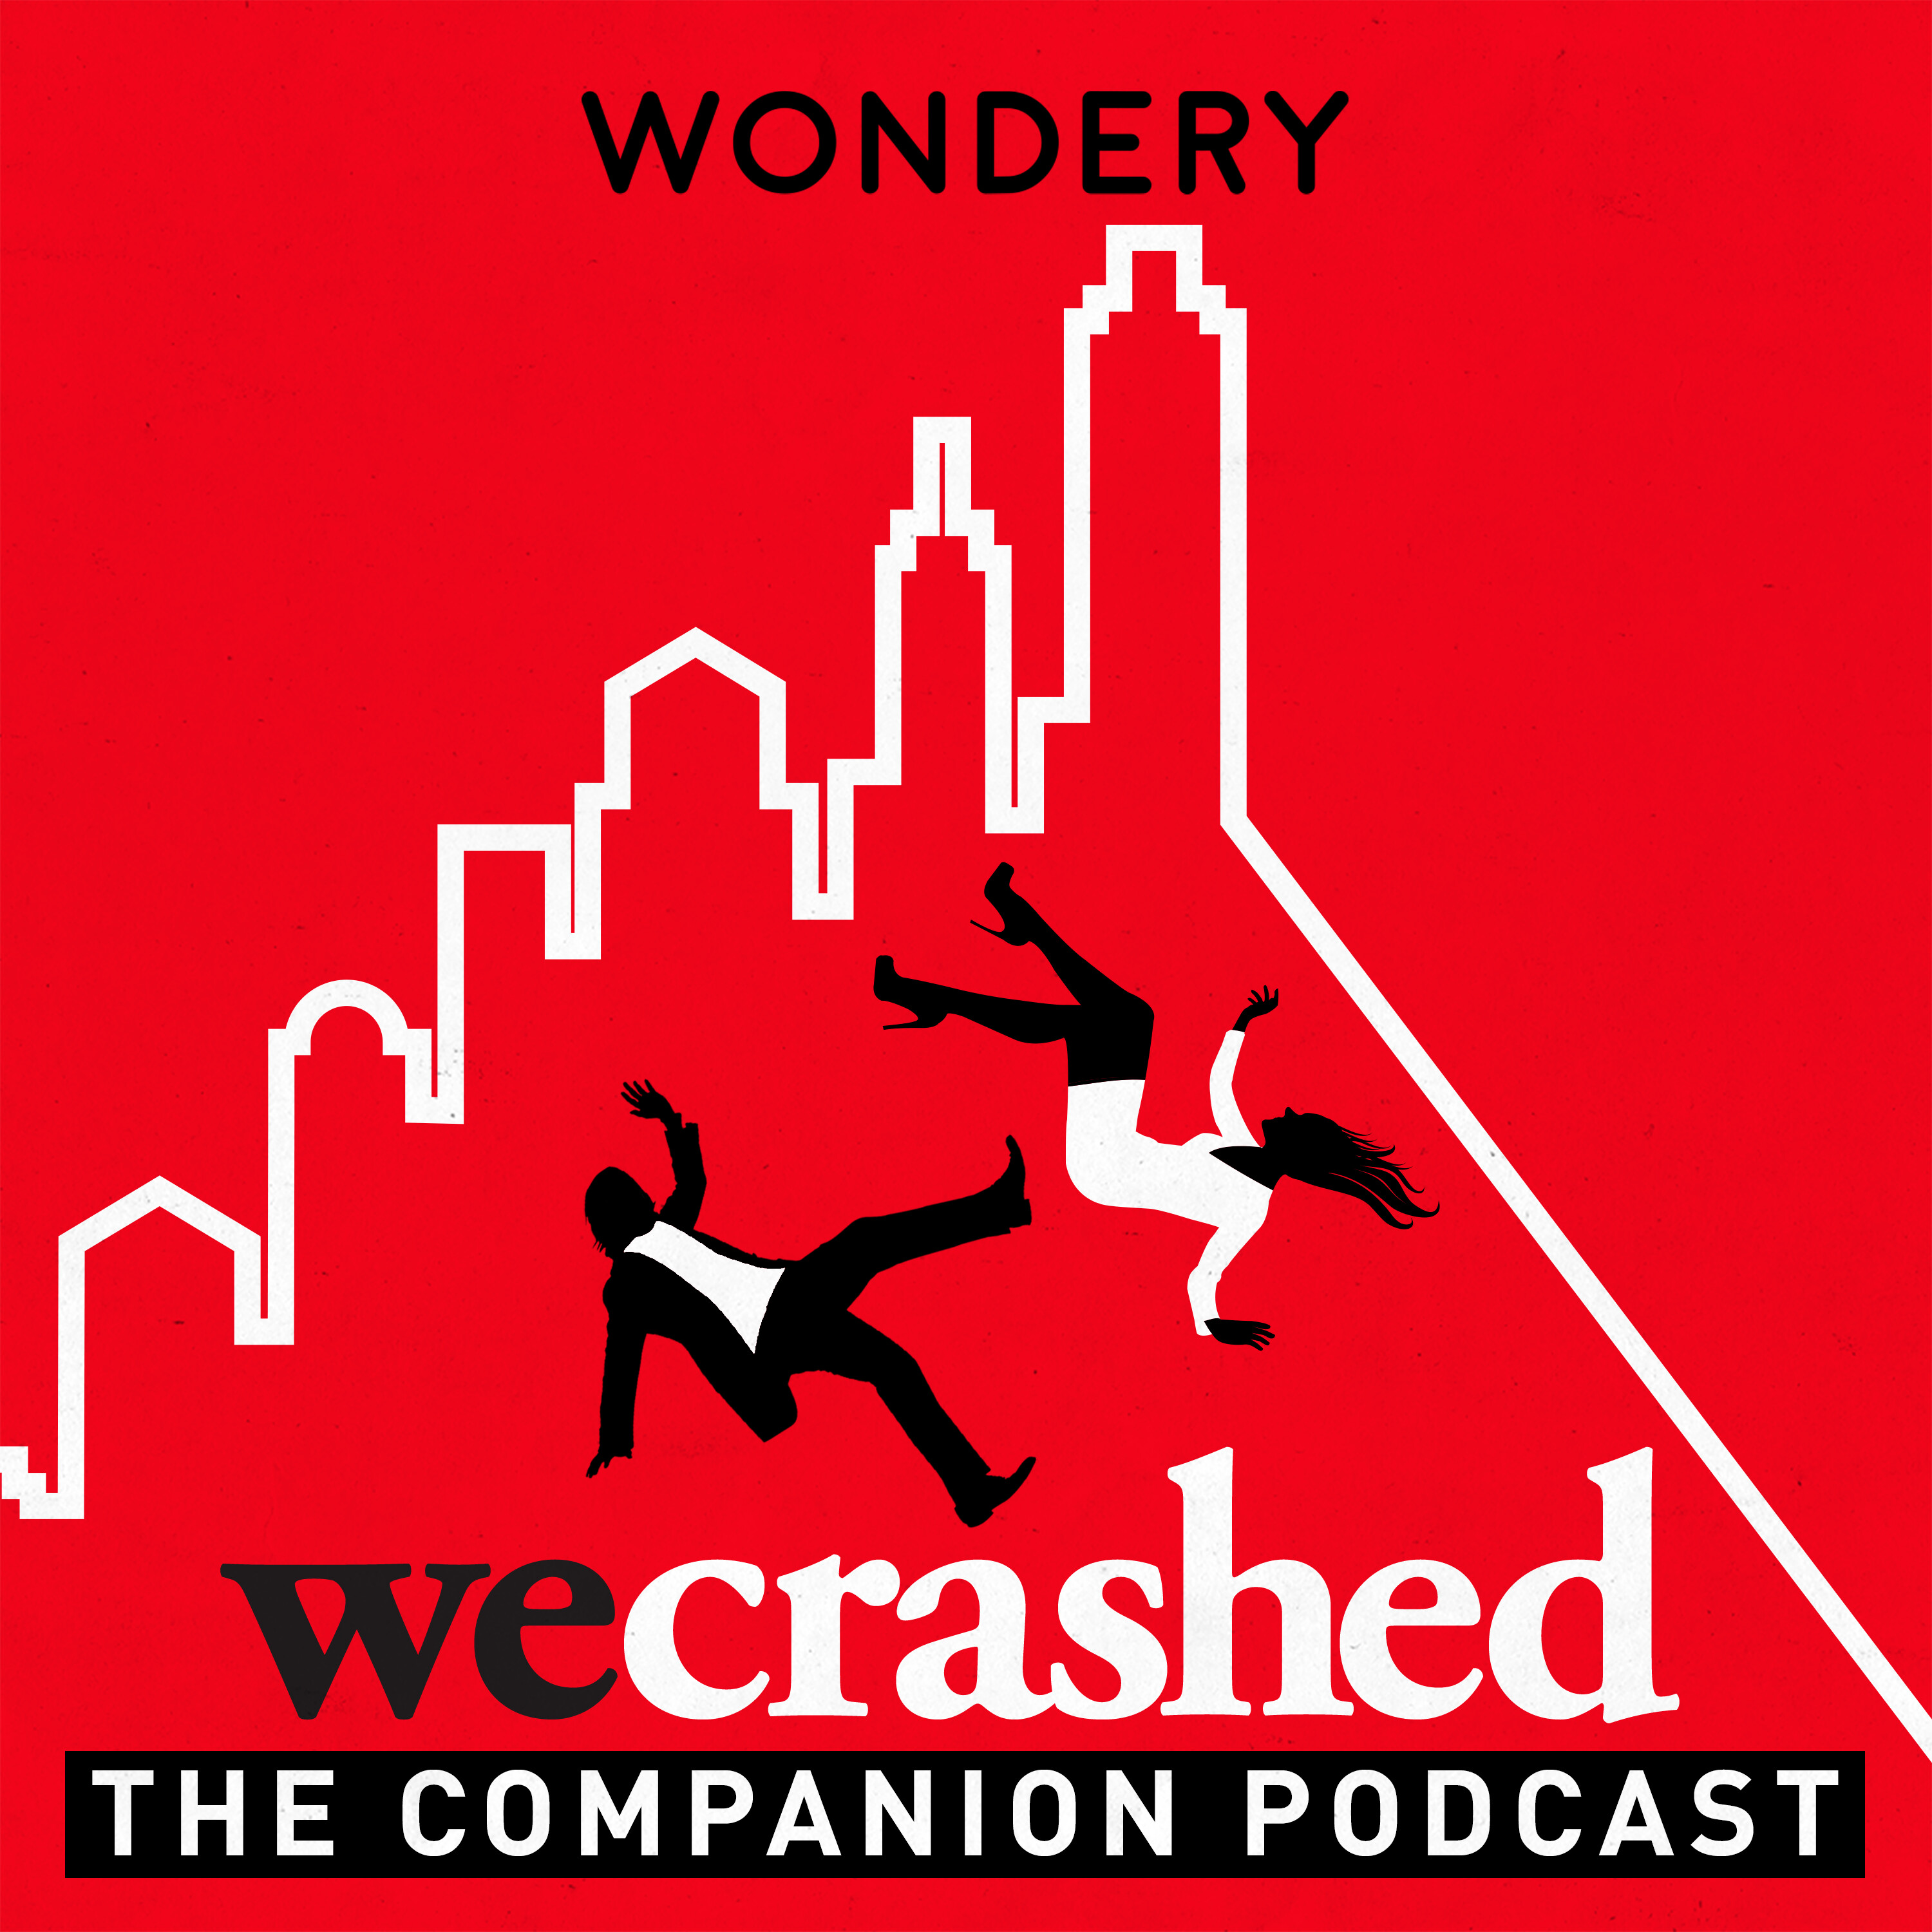 Introducing WeCrashed: The Companion Podcast